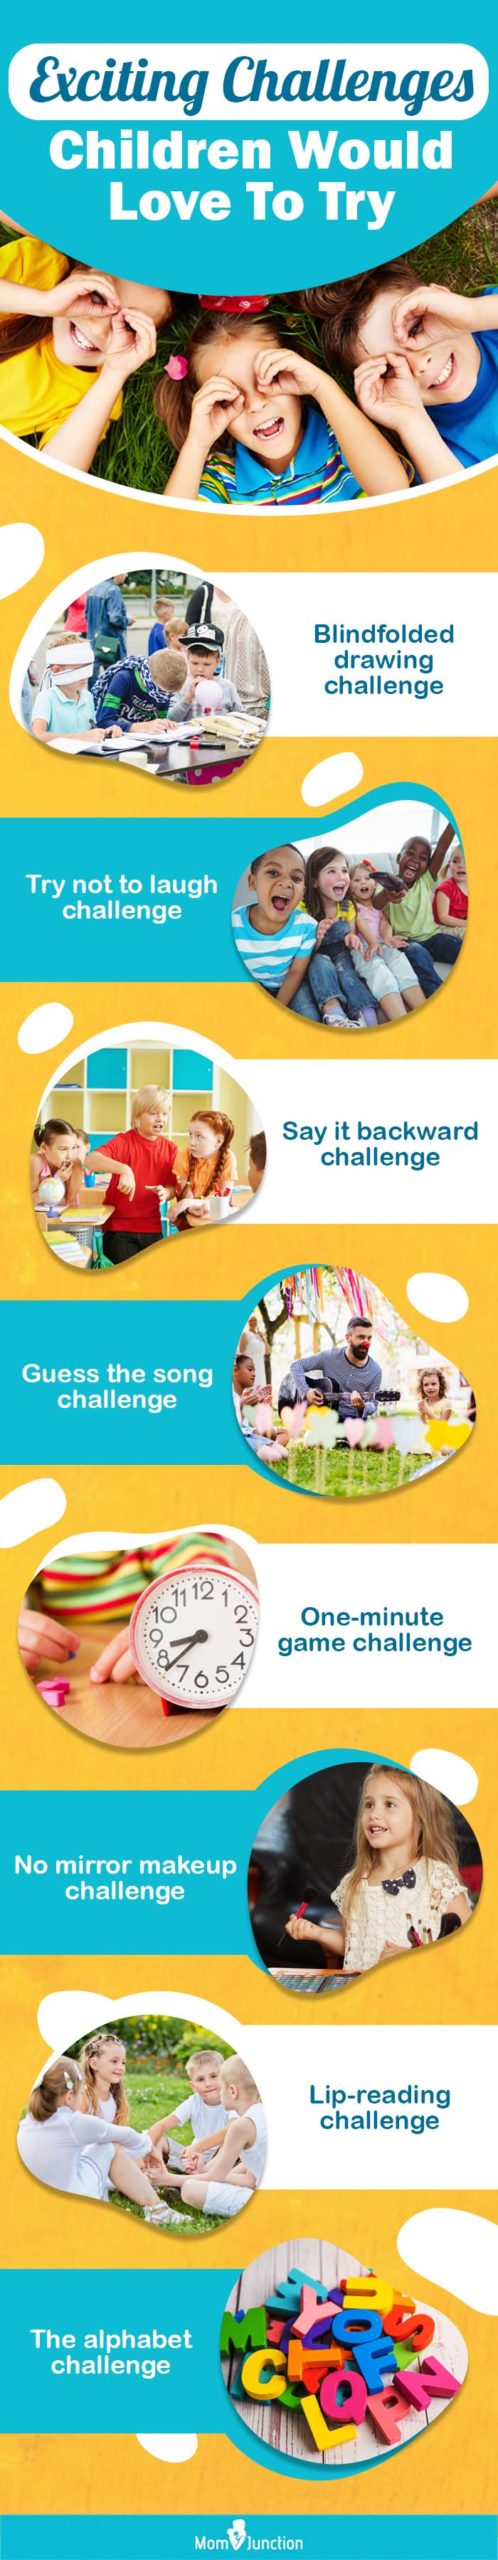 exciting challenges children would love to try (infographic)